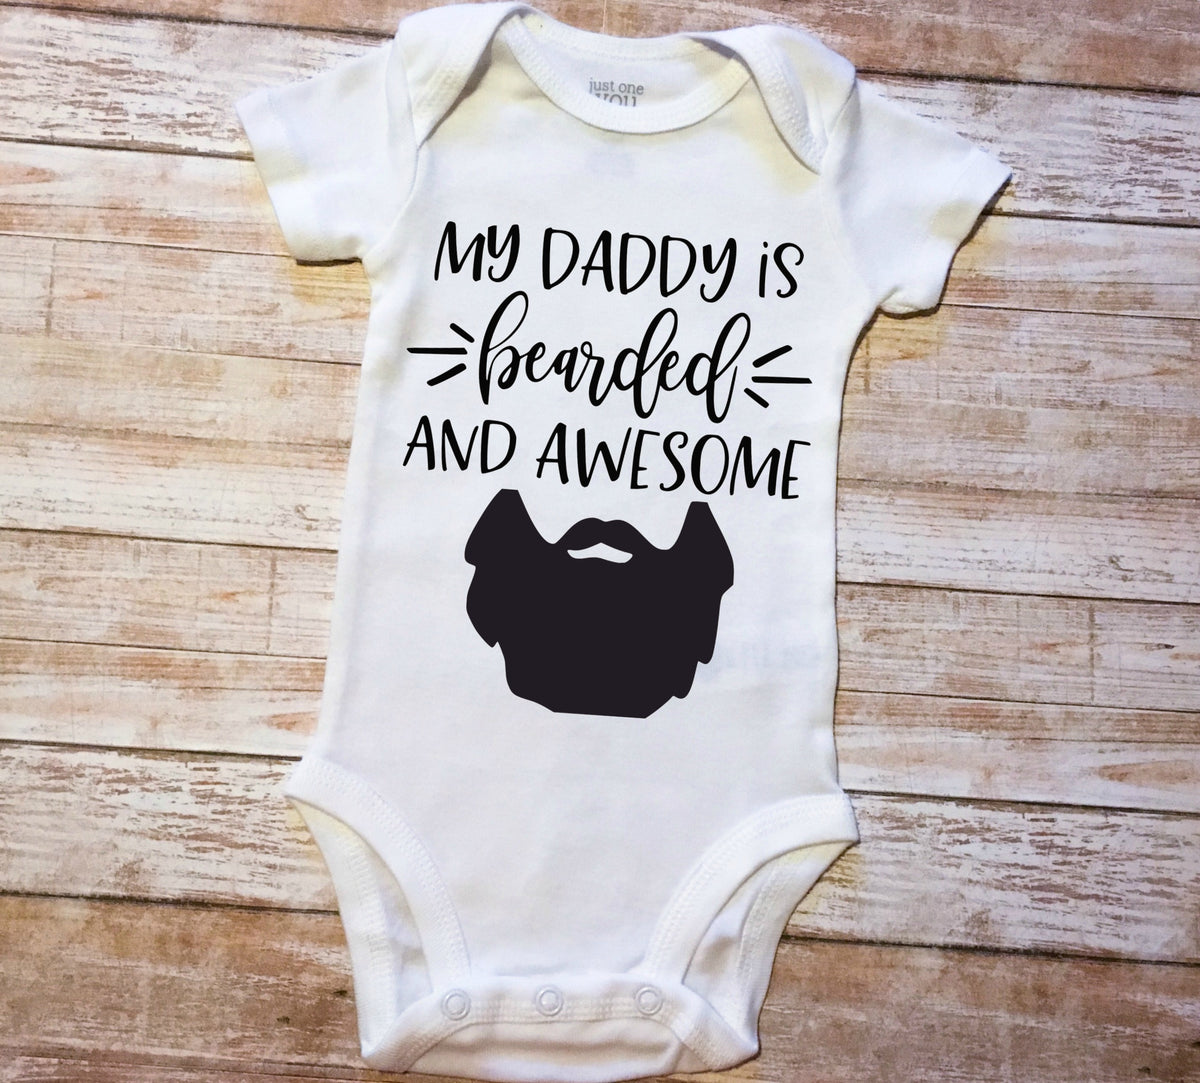 Download My Daddy is Bearded and Awesome Father's Day SVG DXF EPS ...